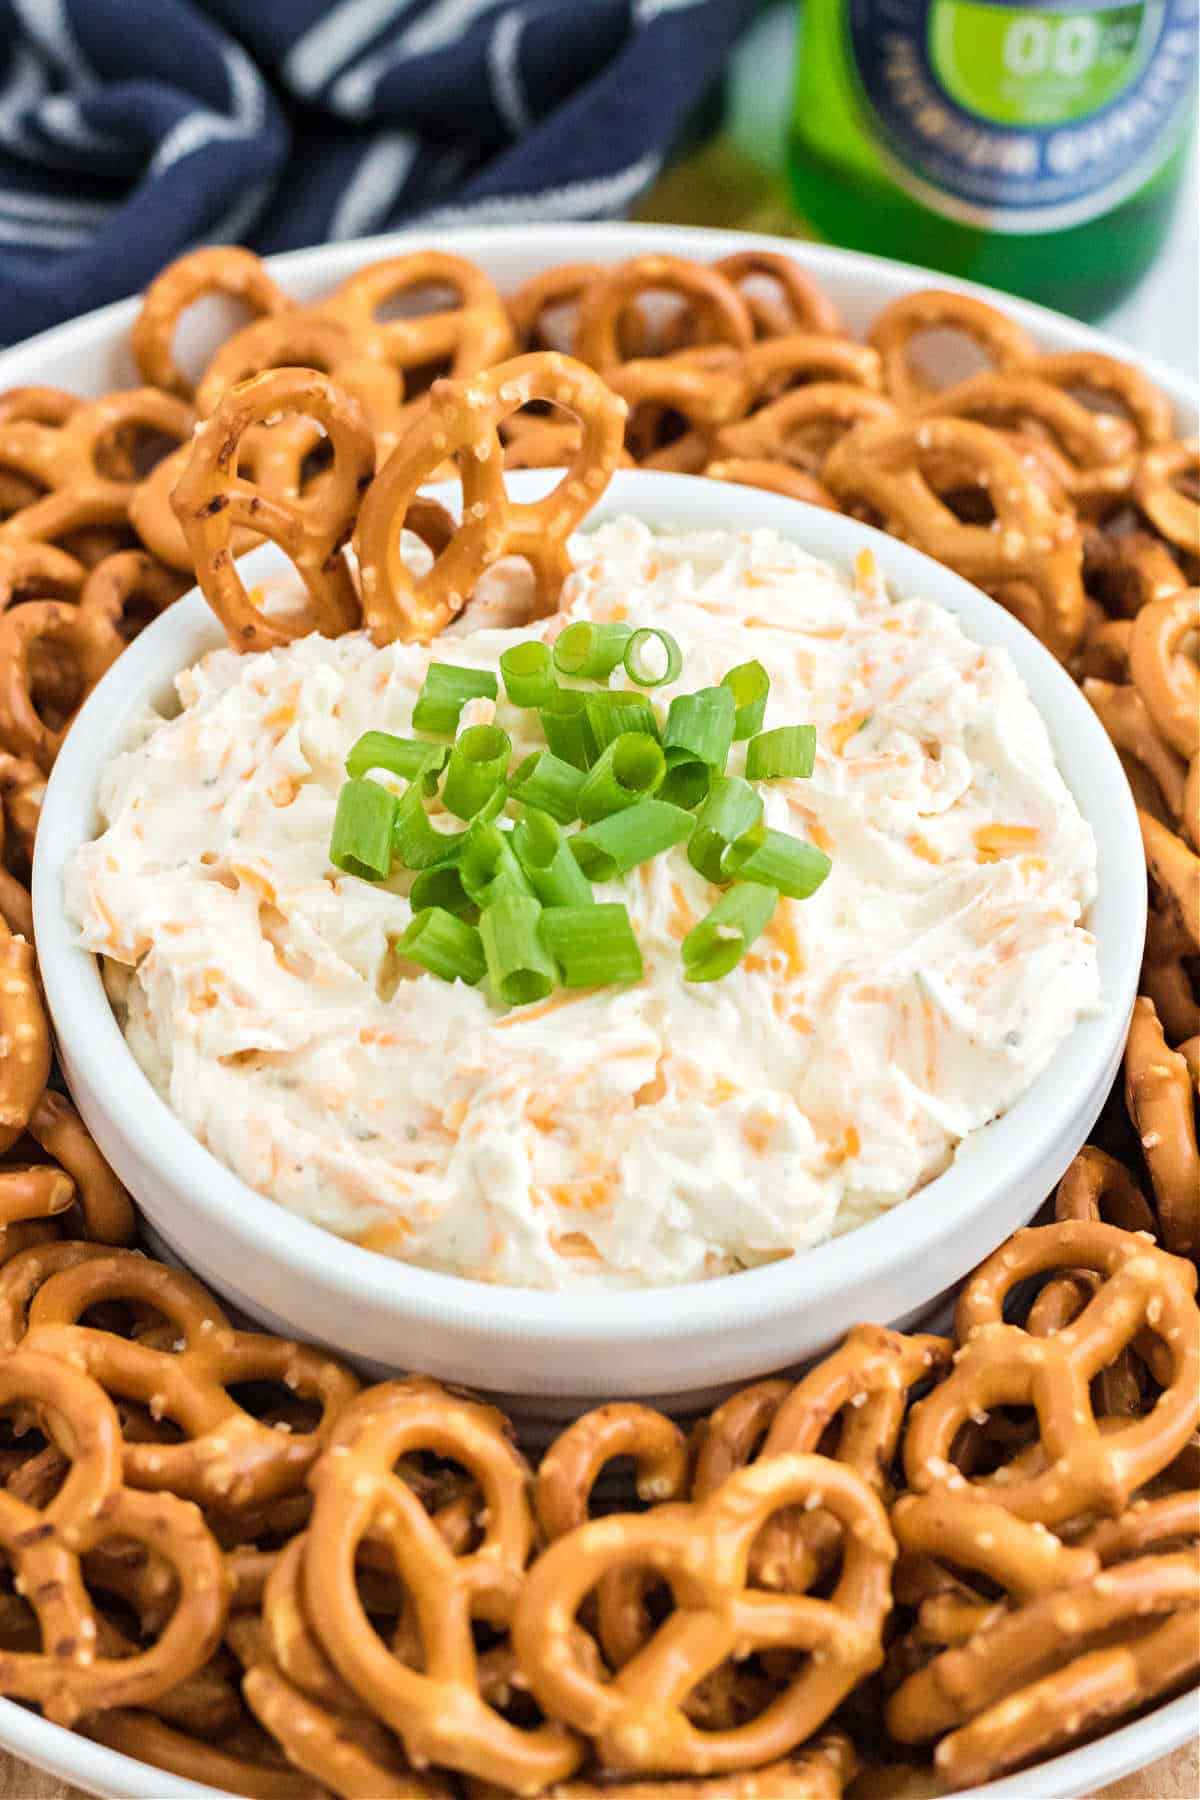 Cheese dip in a white bowl surrounded by pretzel twists for dipping.